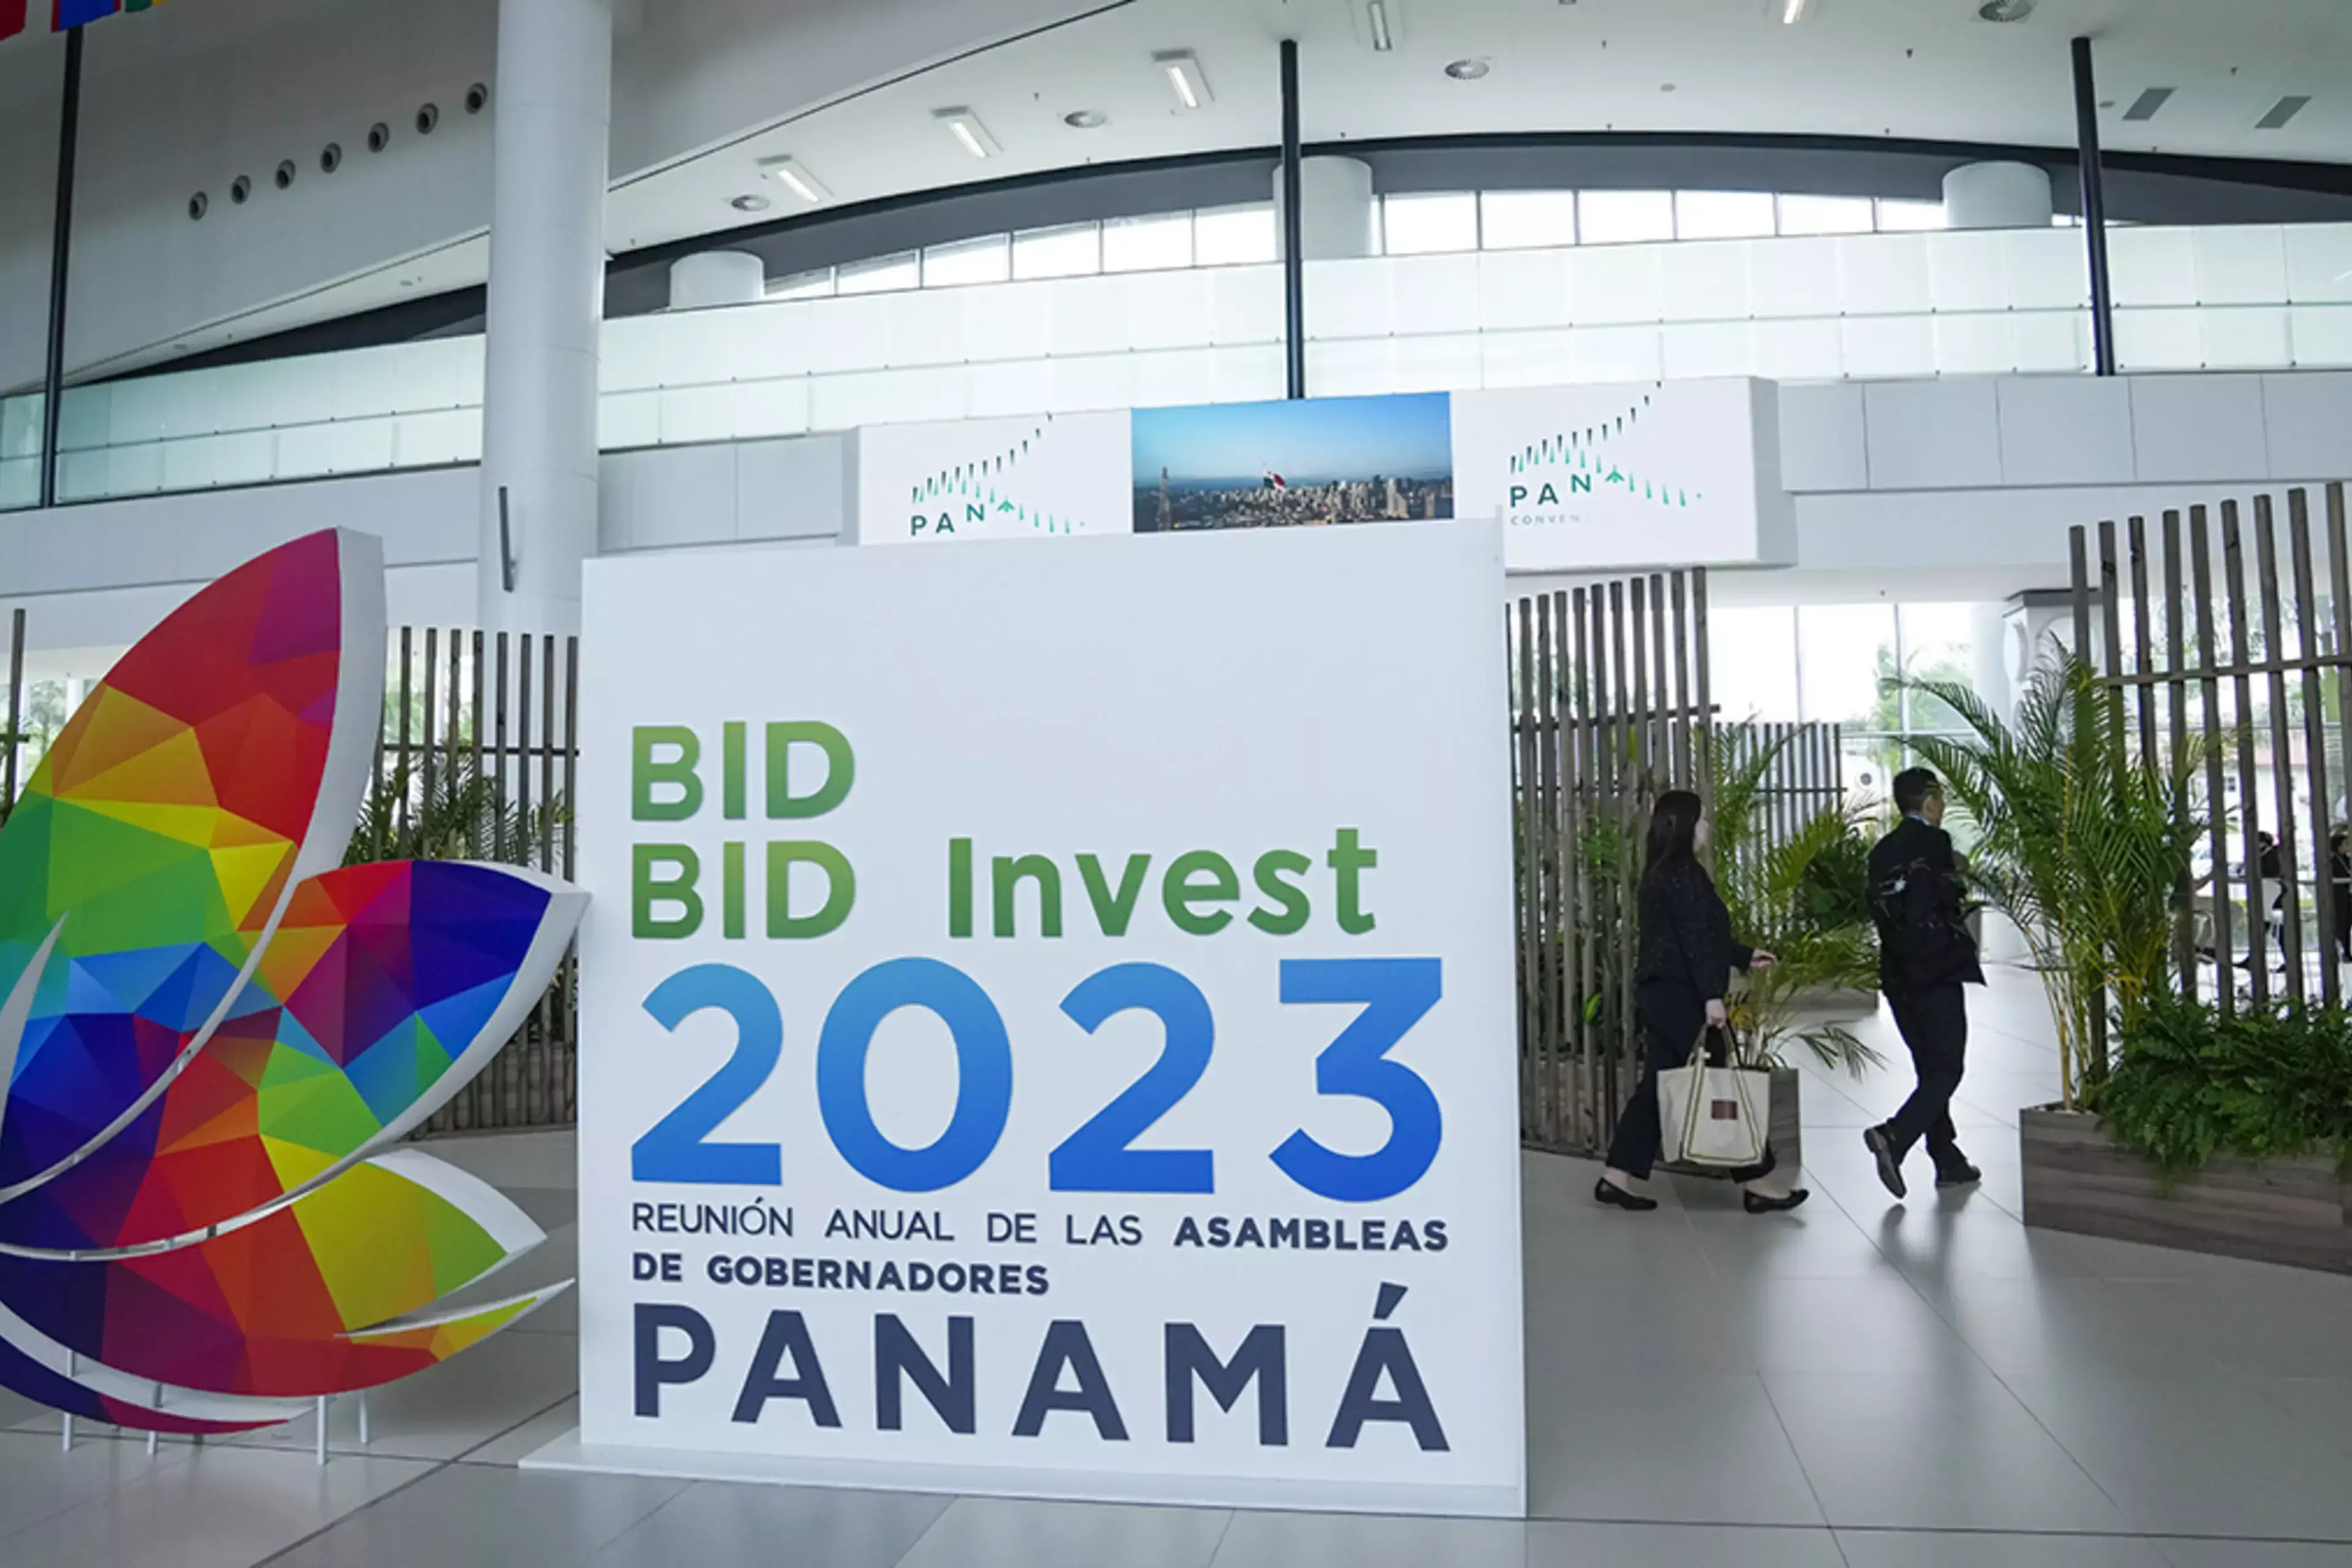 A sign promotes the IDB Board of Governors meeting in Panama City, Panama, in March 2023.